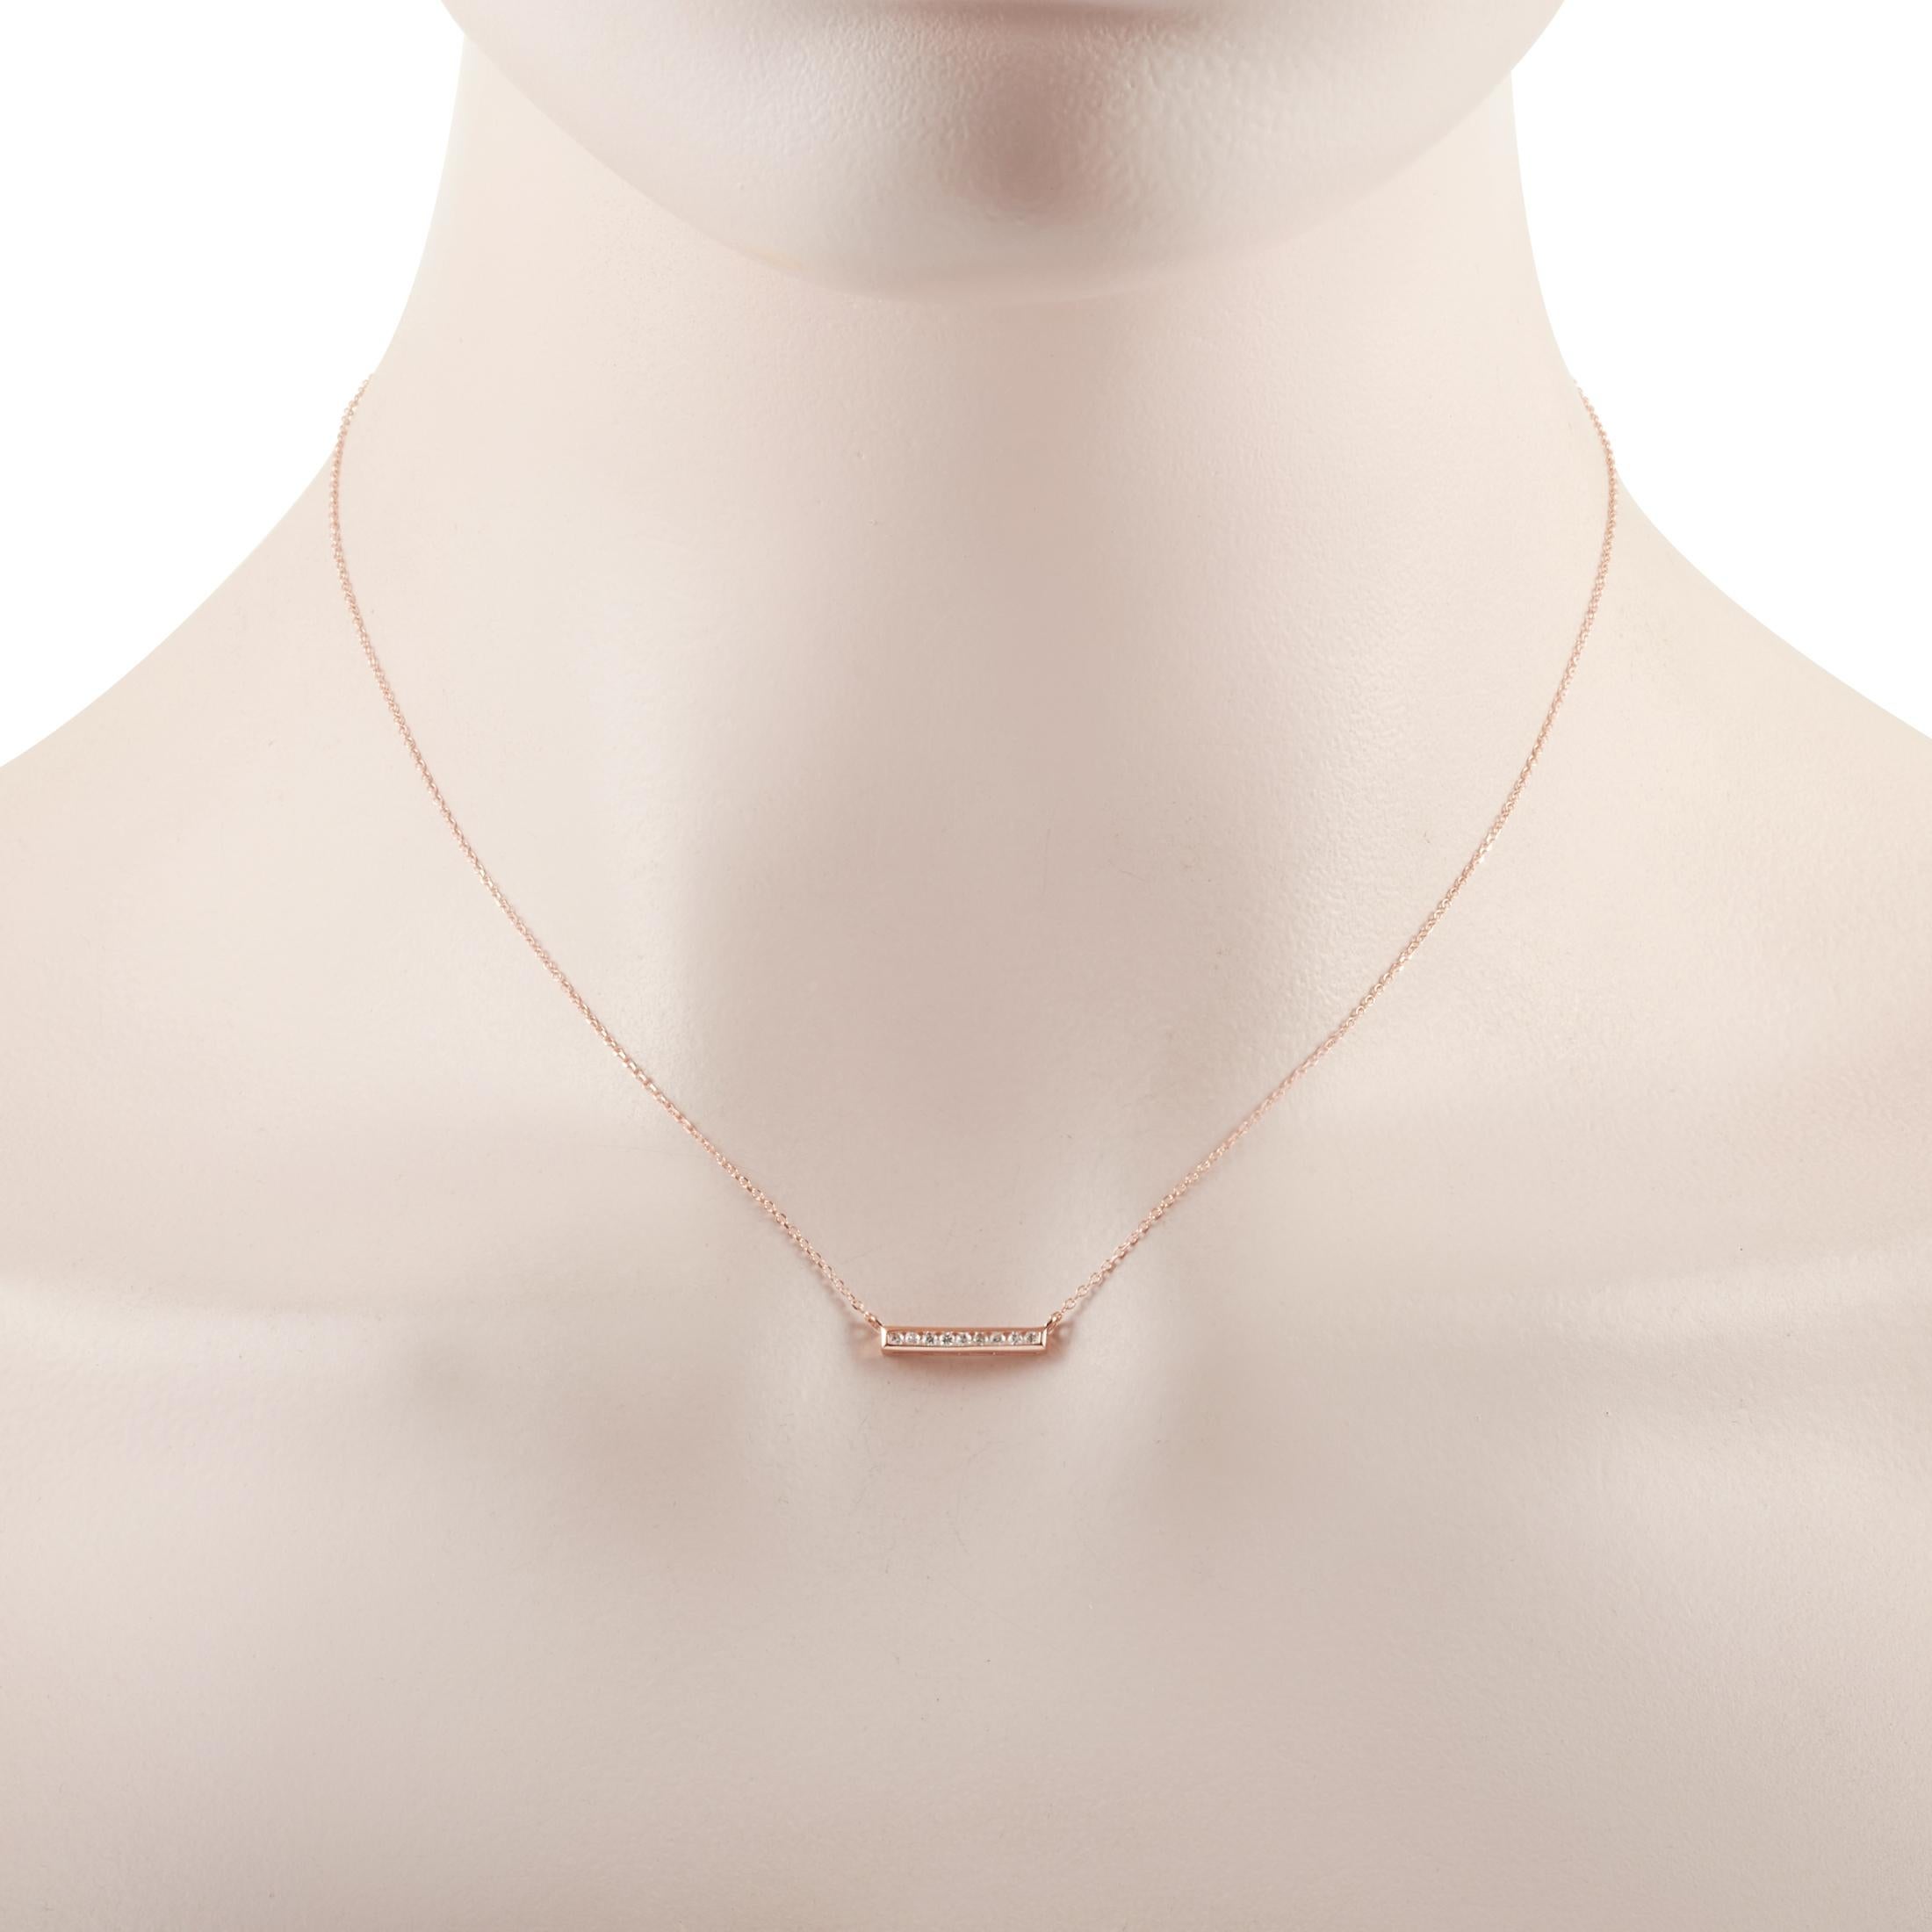 This LB Exclusive necklace is crafted from 14K rose gold and weighs 1.6 grams. It is presented with a 15” chain and boasts a pendant that measures 0.13” in length and 0.50” in width. The necklace is set with diamonds that total 0.10 carats.
 
